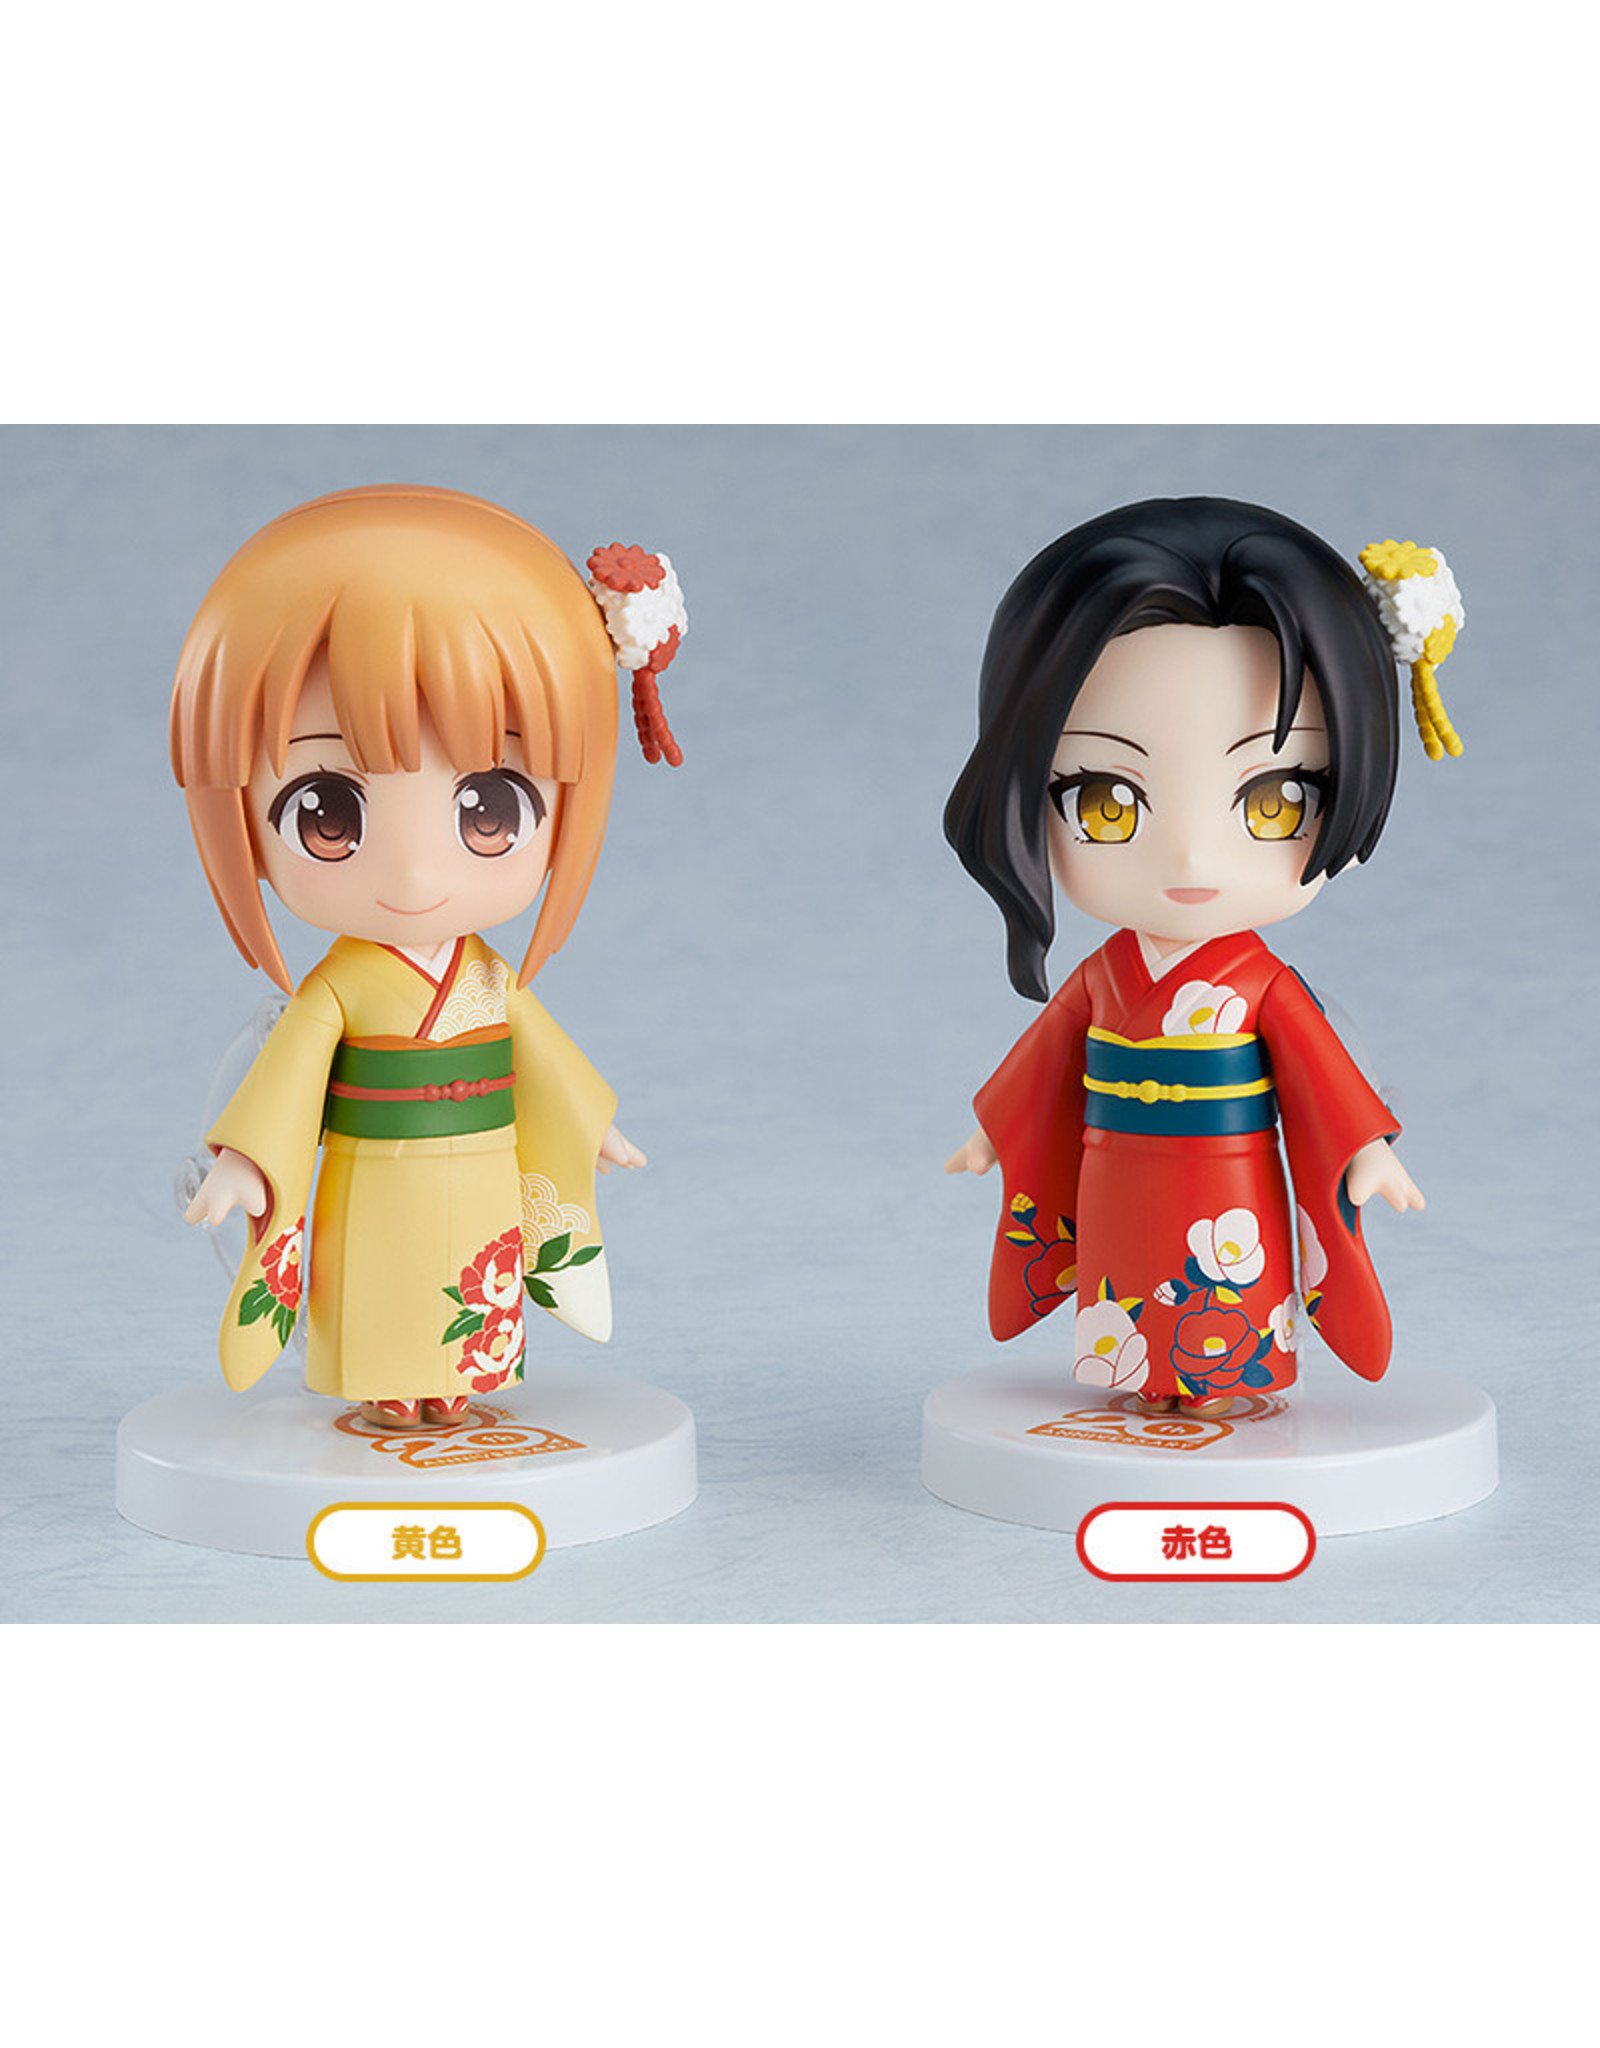 Nendoroid Dress Up Coming of Age Furisode